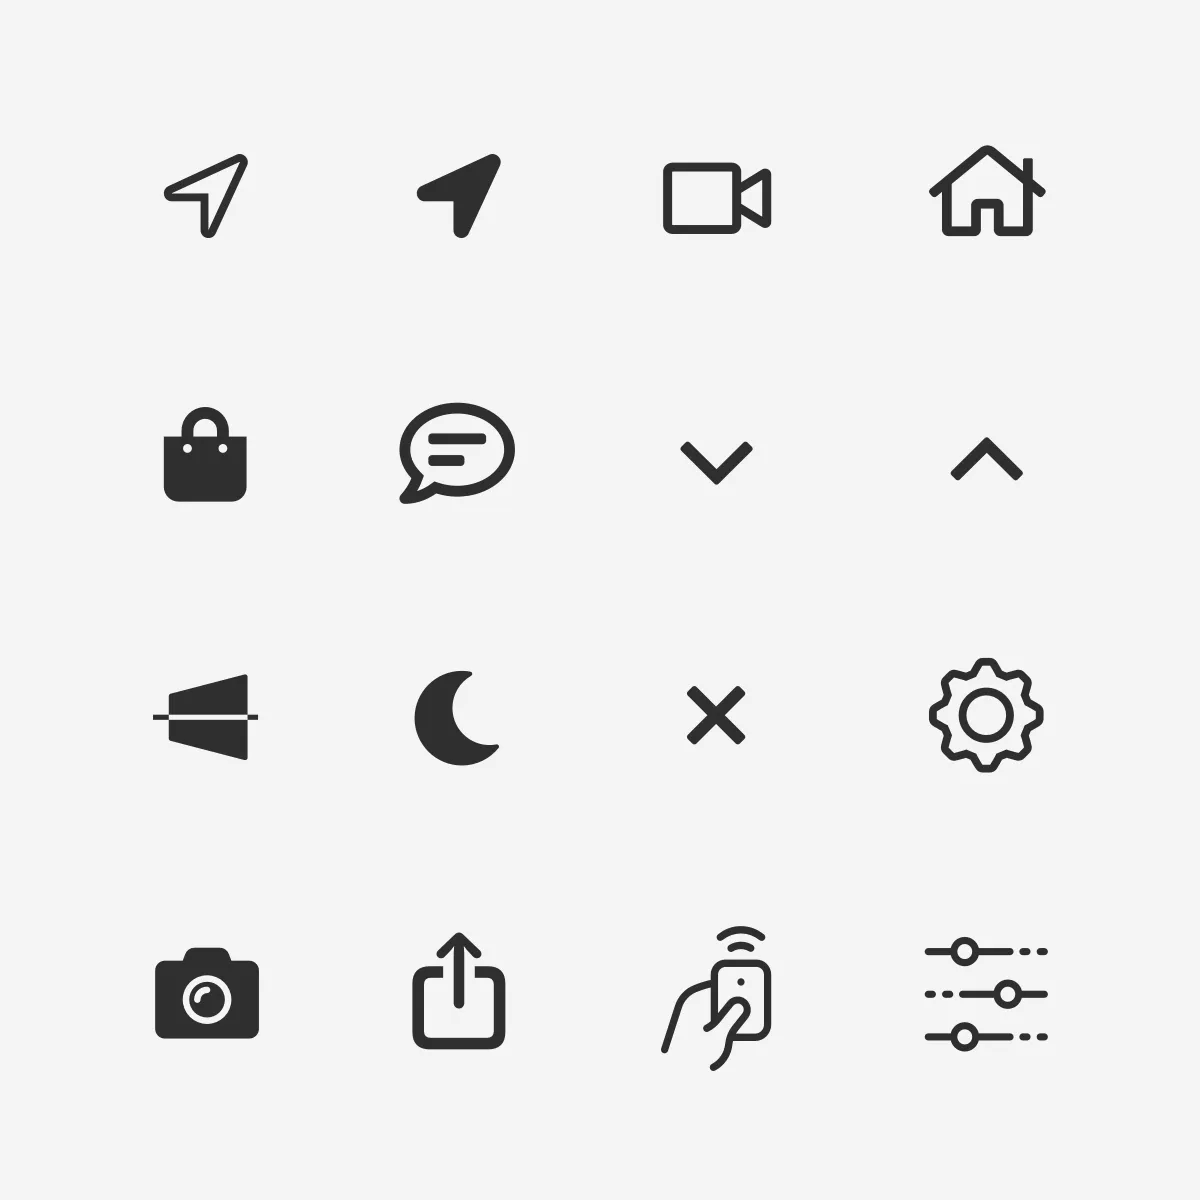 Icons used in skylight app